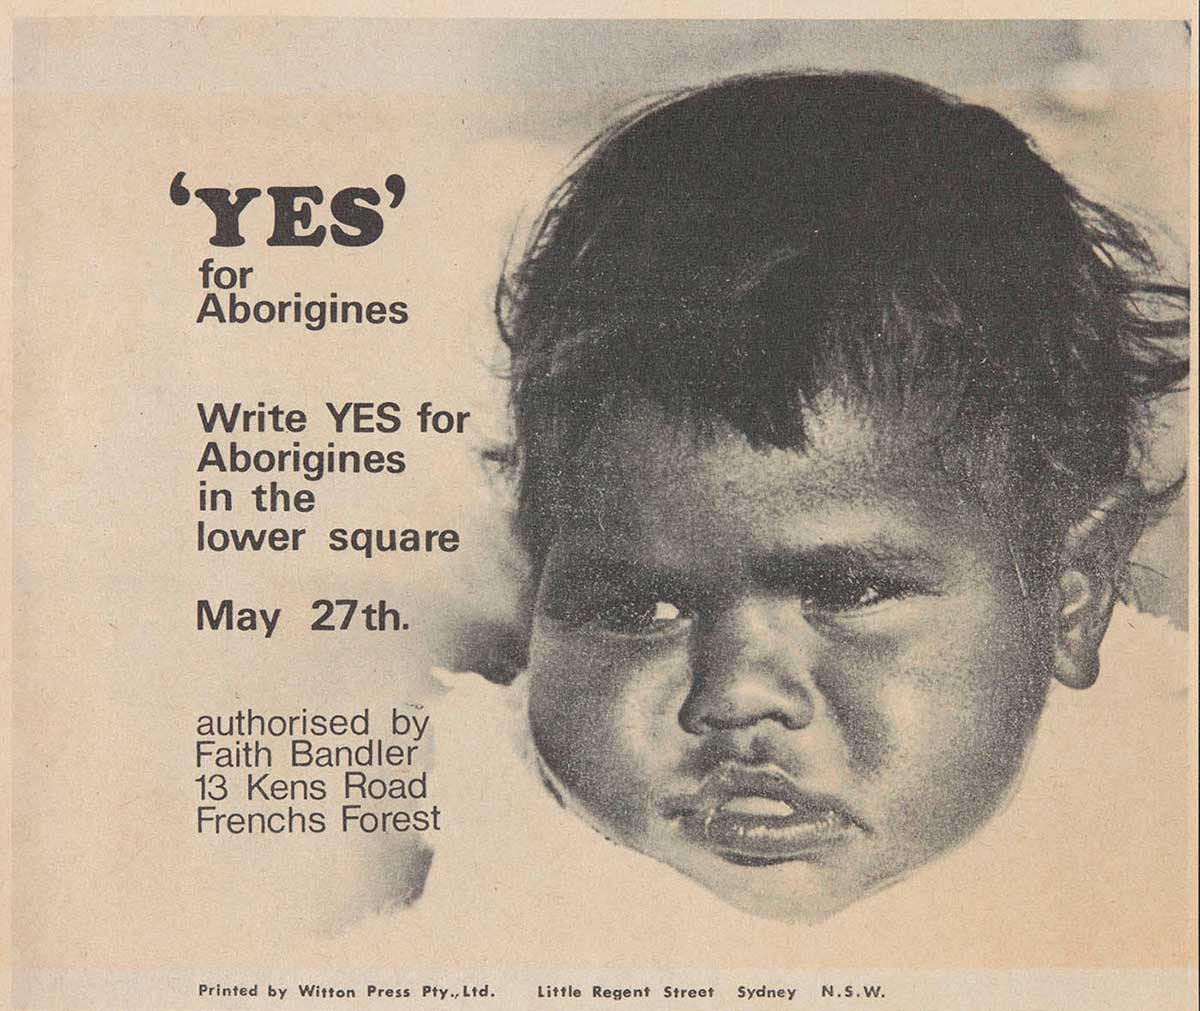 Portrait of Aboriginal toddler with the words ‘Yes for Aborigines – write YES for Aborigines in the lower square – May 27th. – authorised by Faith Bandler 13 Kens Road Frenchs Forest.